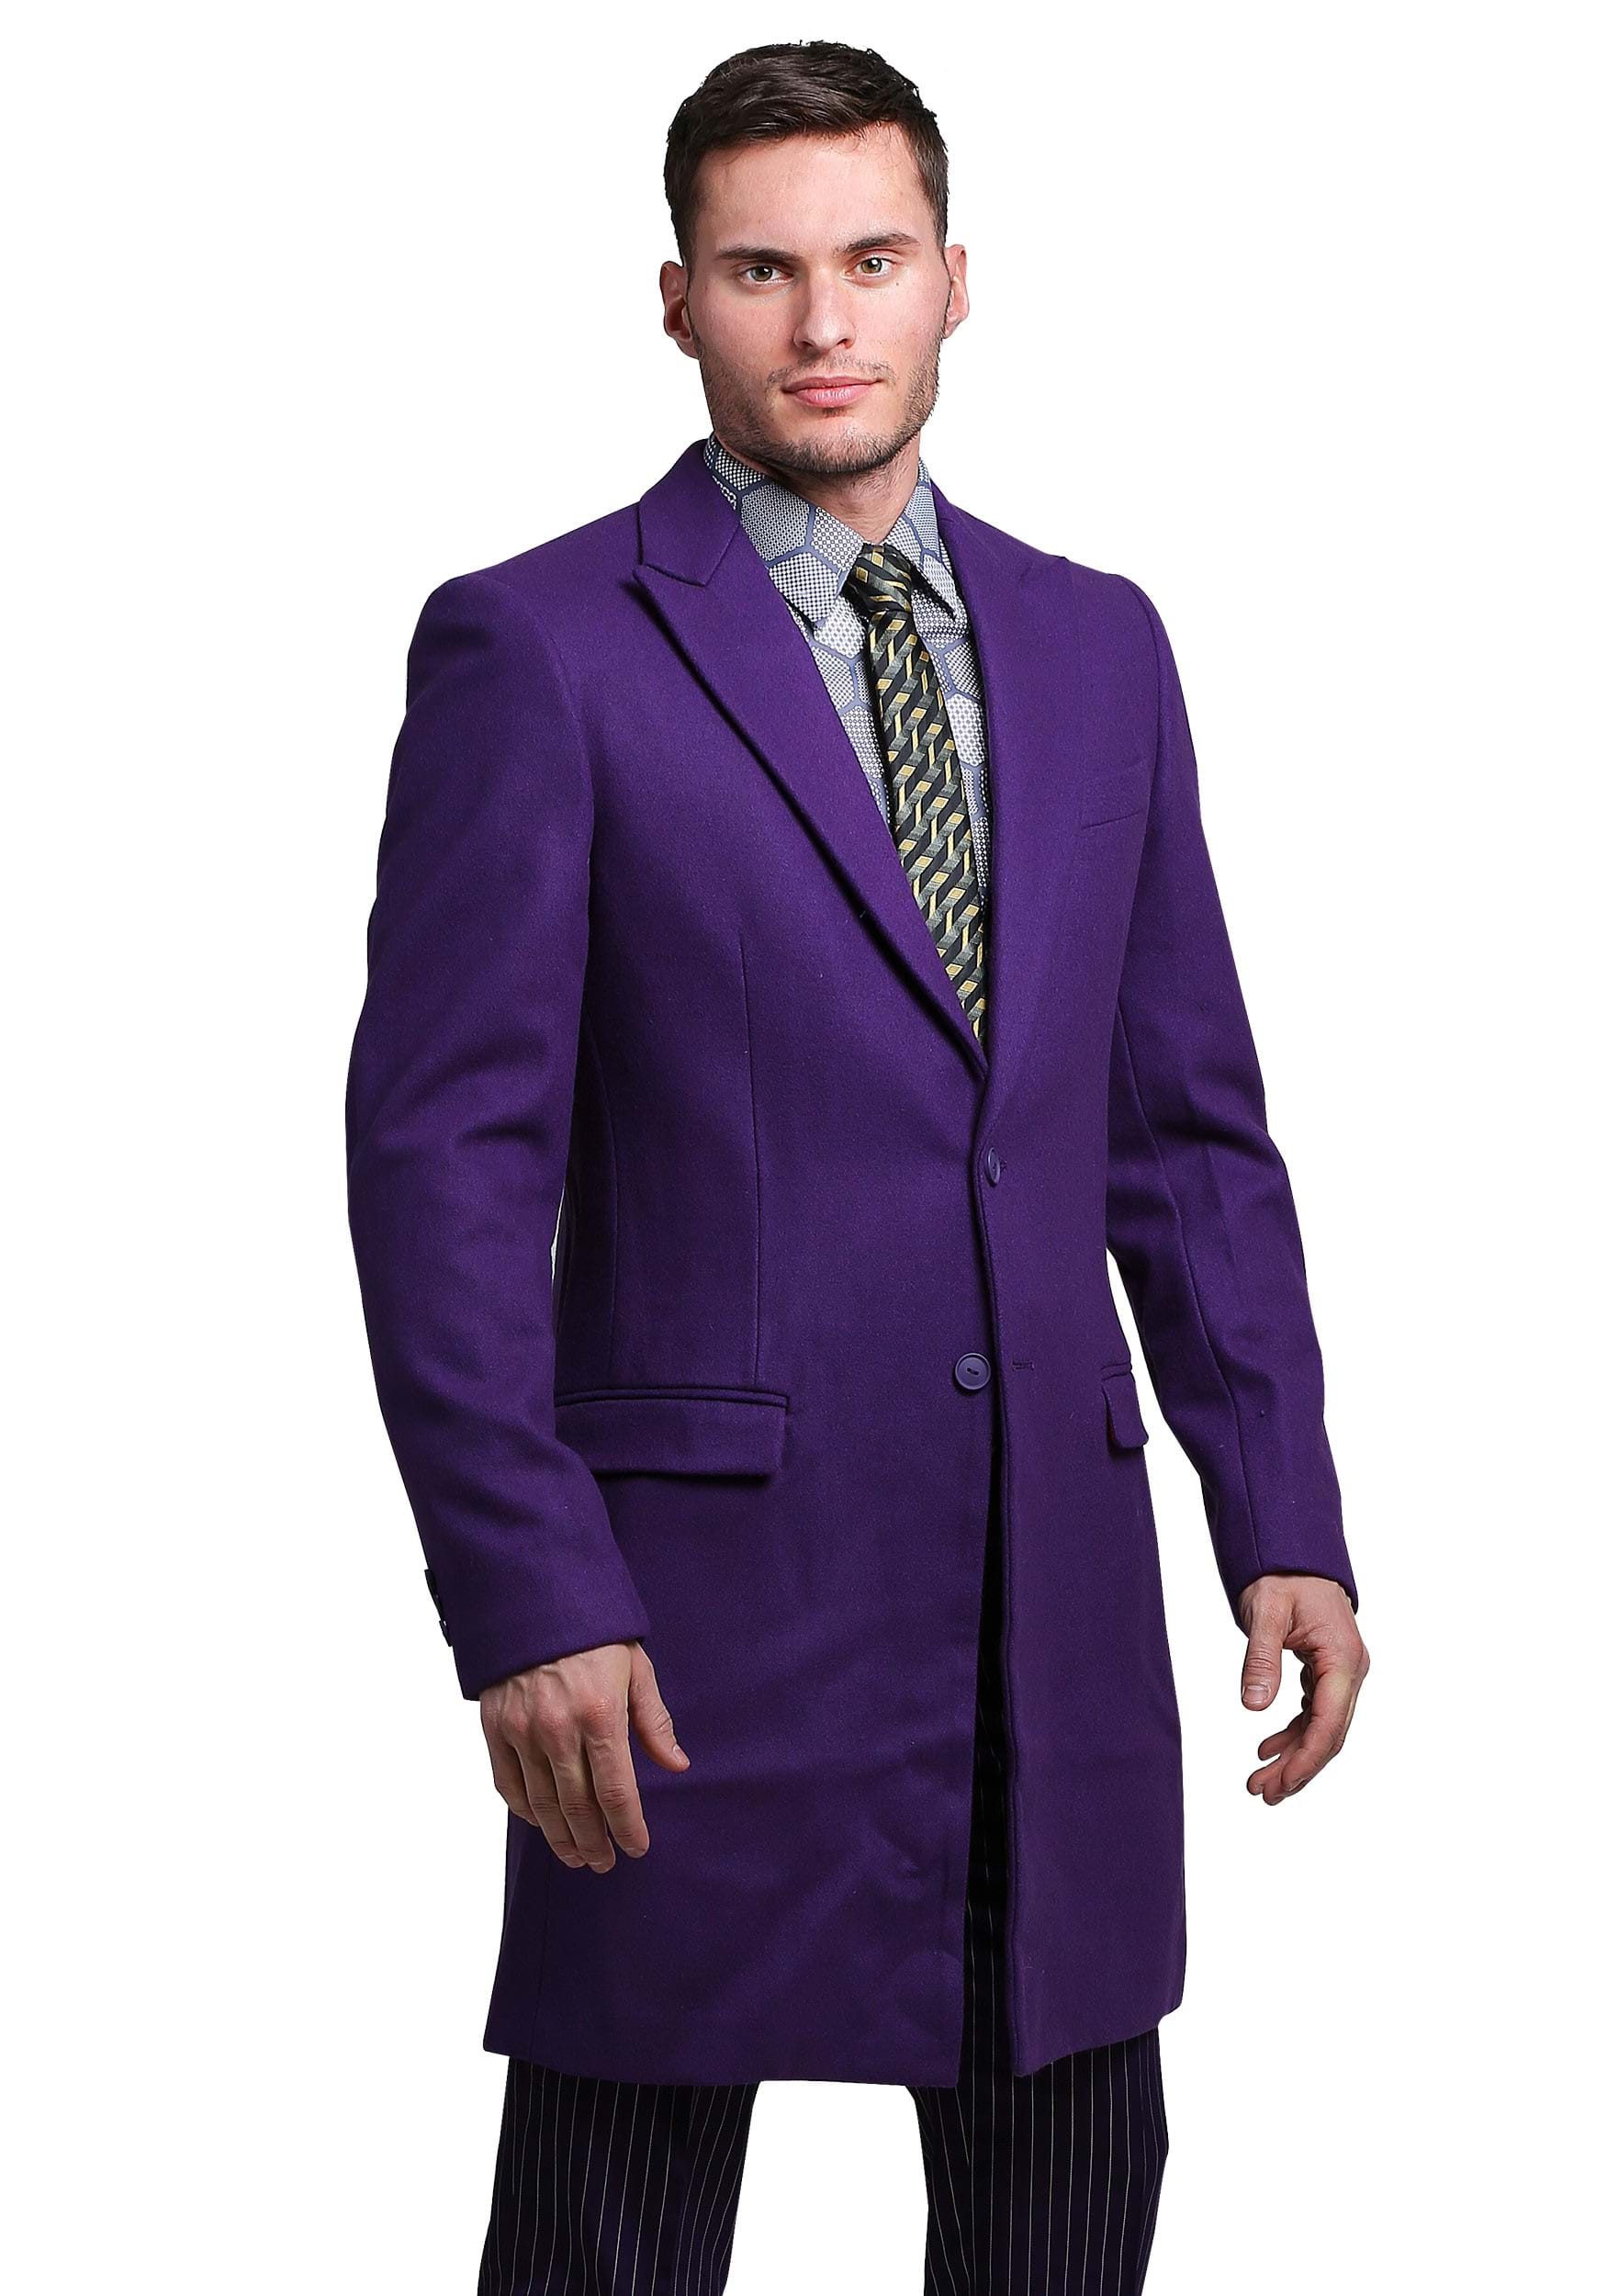 Image of THE JOKER Slim Fit Suit Overcoat (Authentic) ID FUN9011O-44